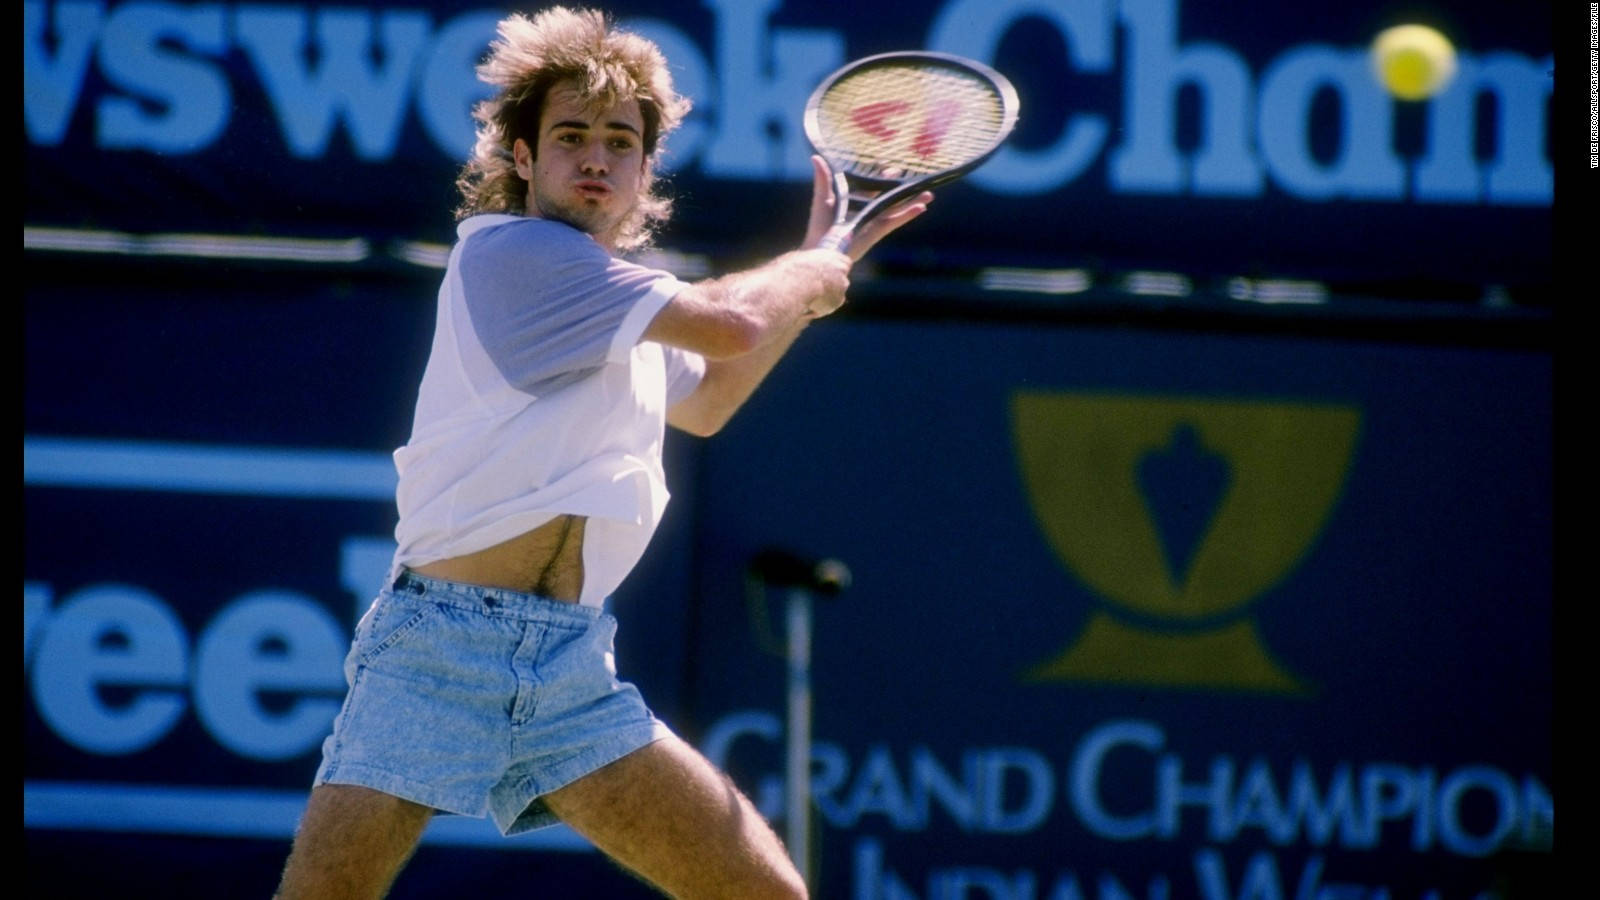 Andre Agassi sporting iconic denim shorts Wallpaper